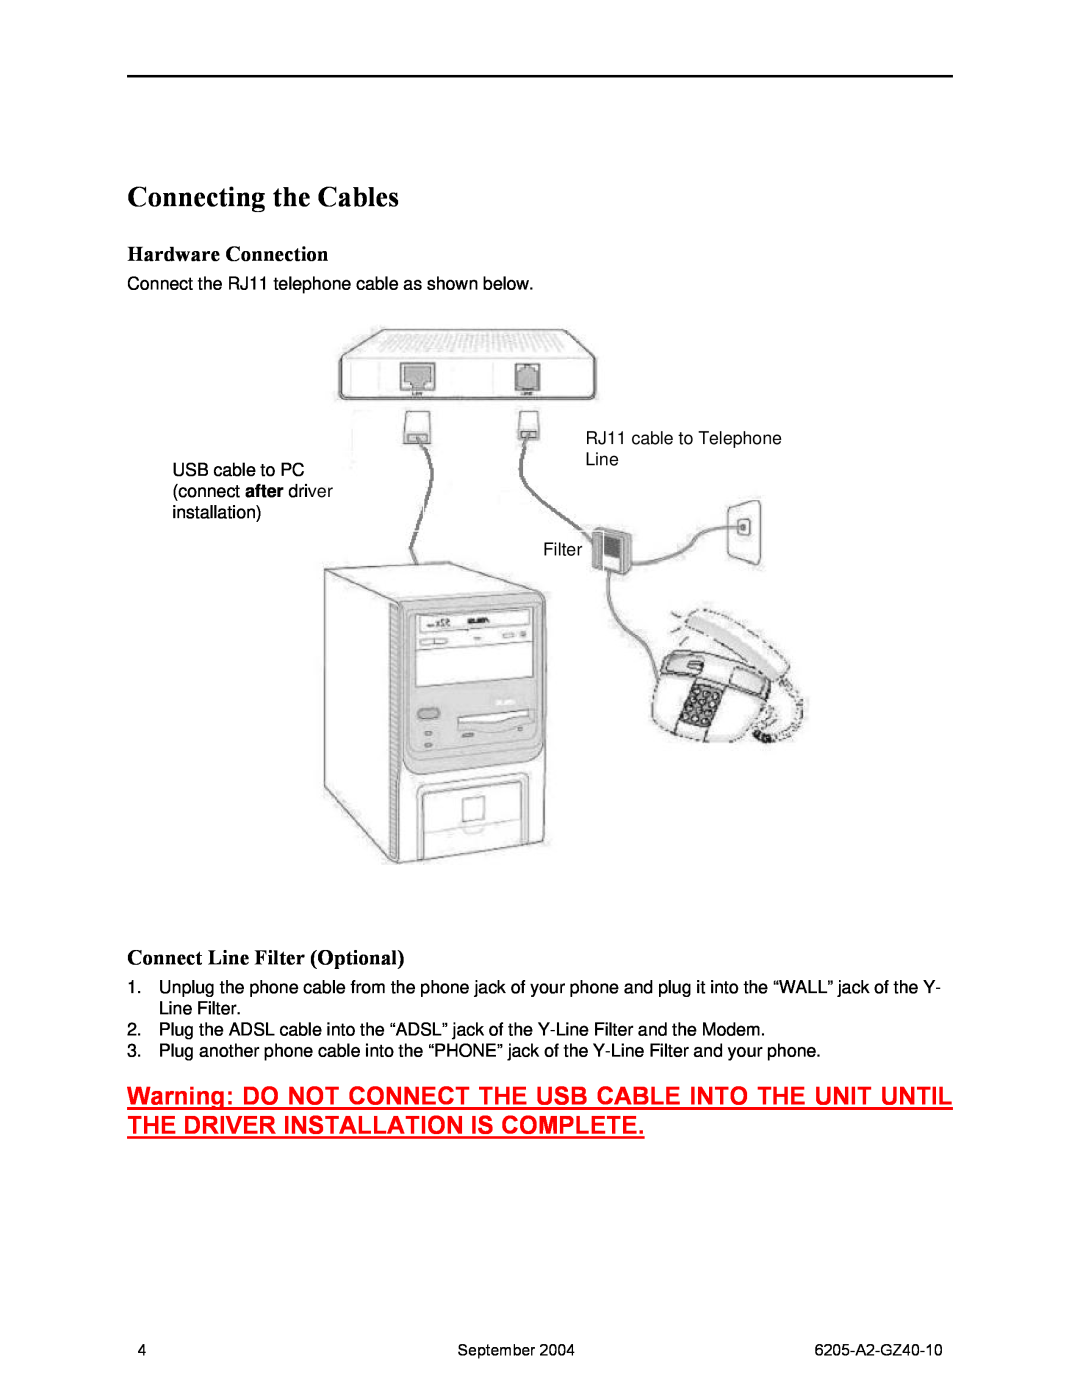 Paradyne 6205 installation instructions Connecting the Cables, Hardware Connection, Connect Line Filter Optional 